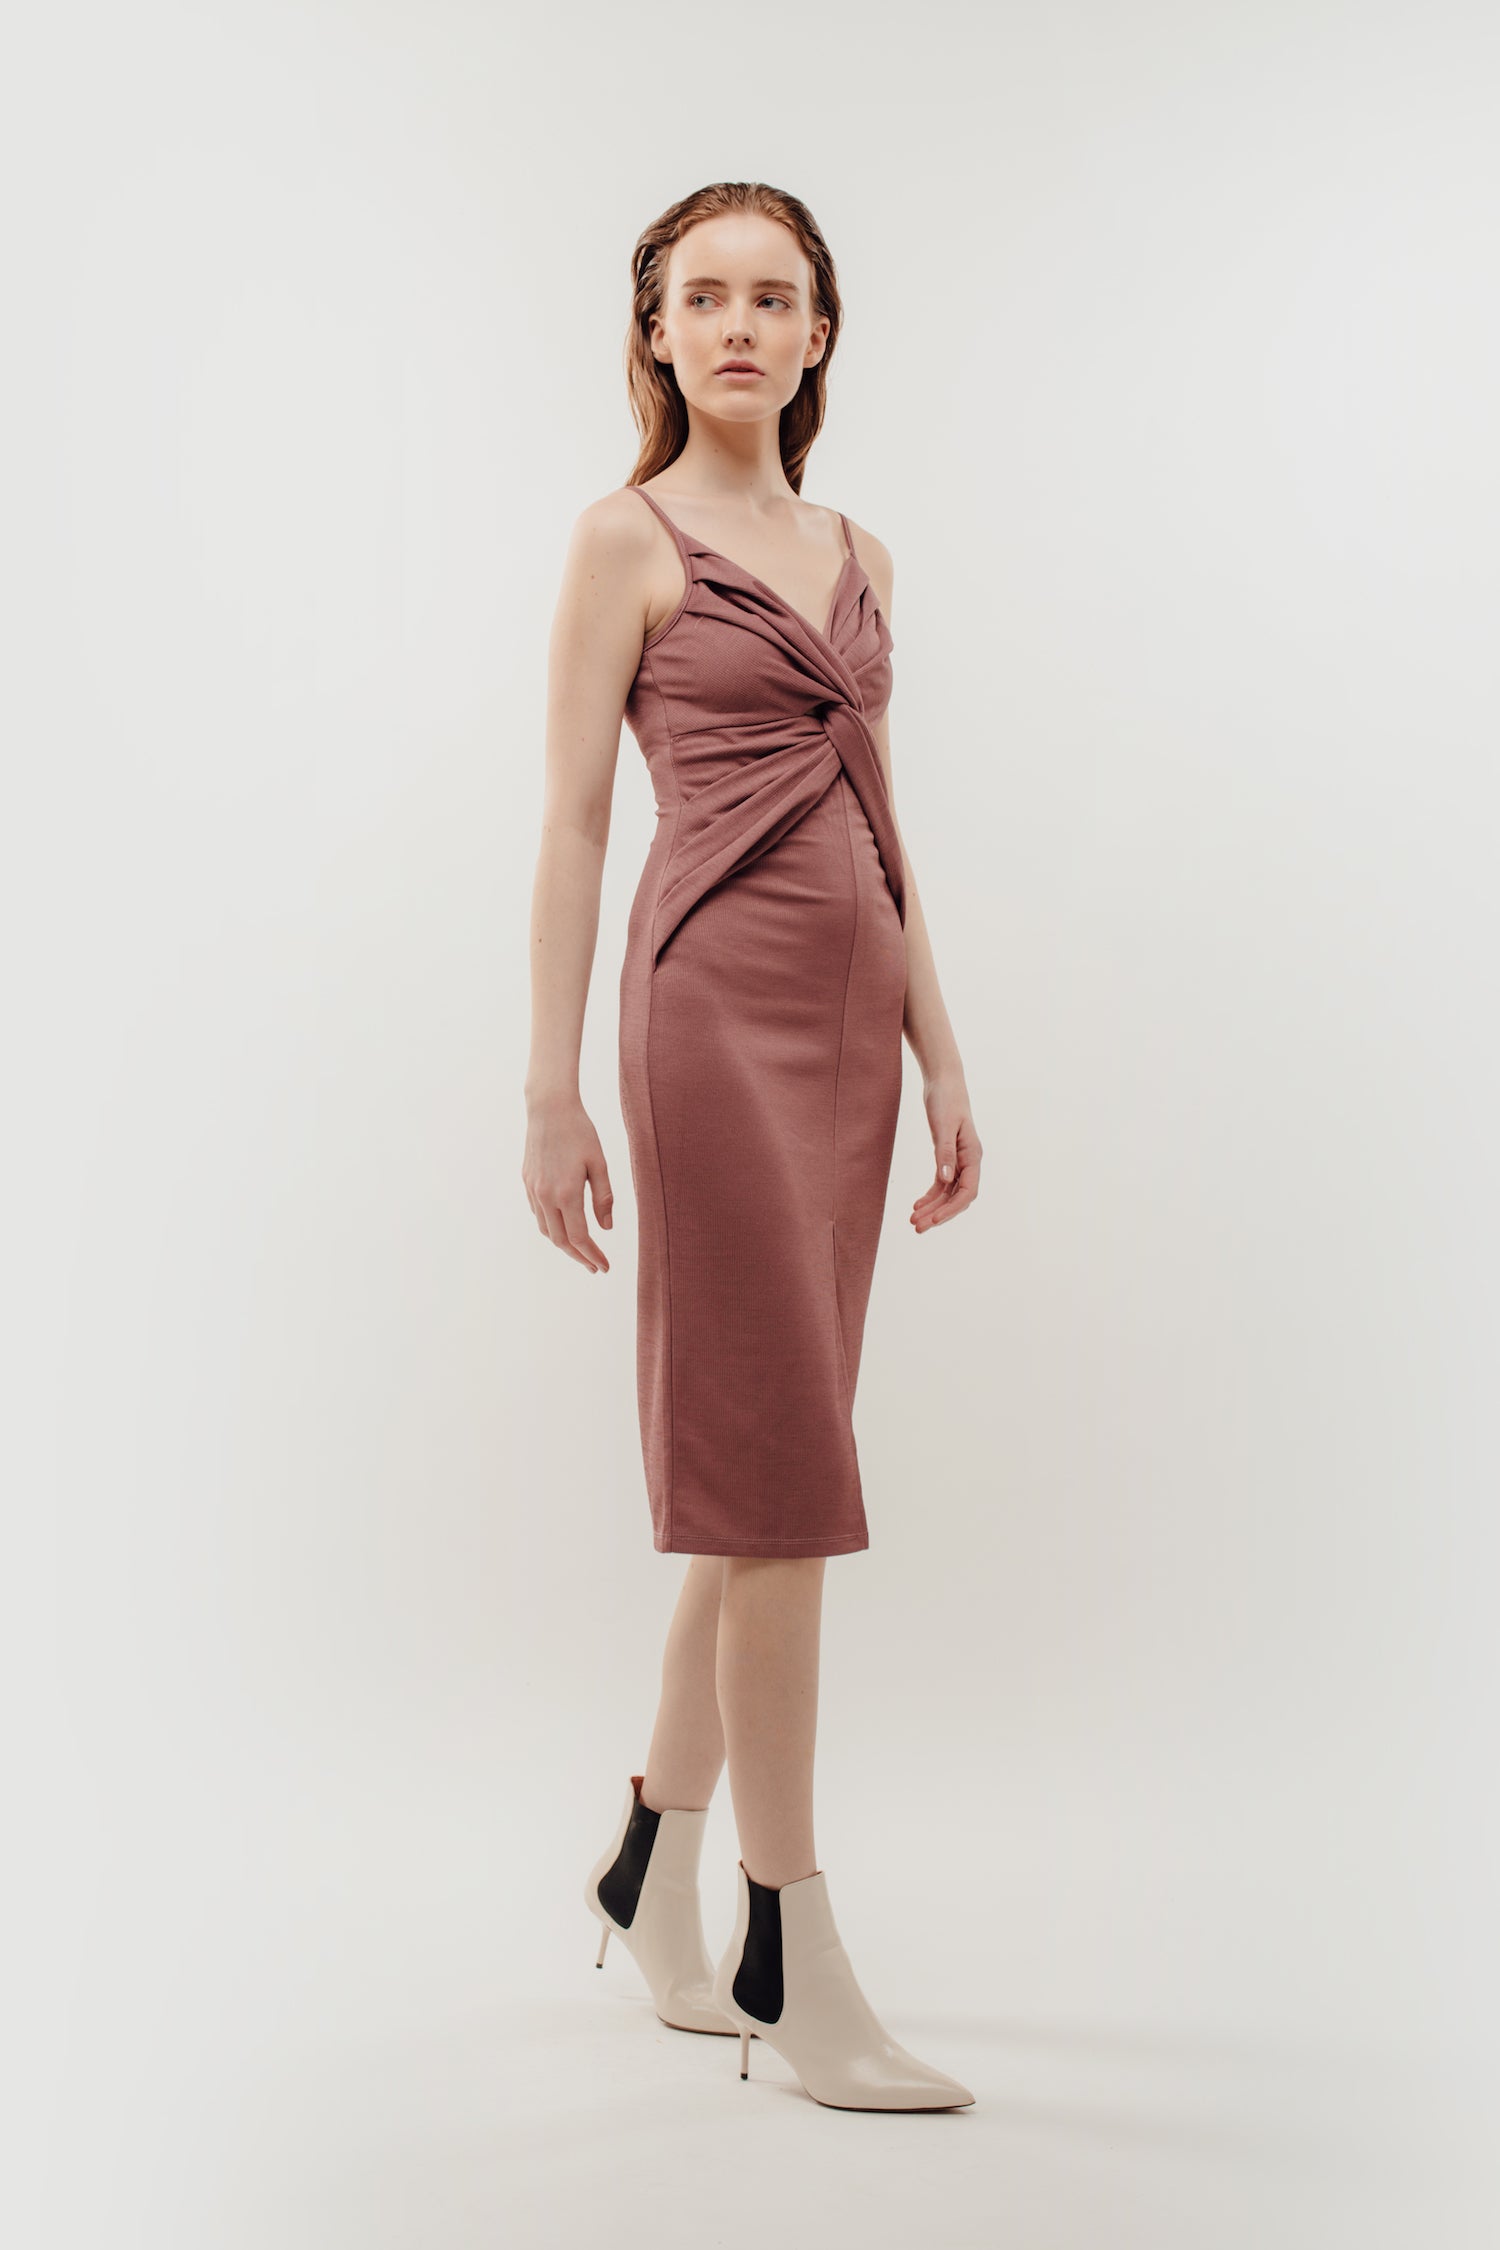 Knotted Dress in Rose Mauve